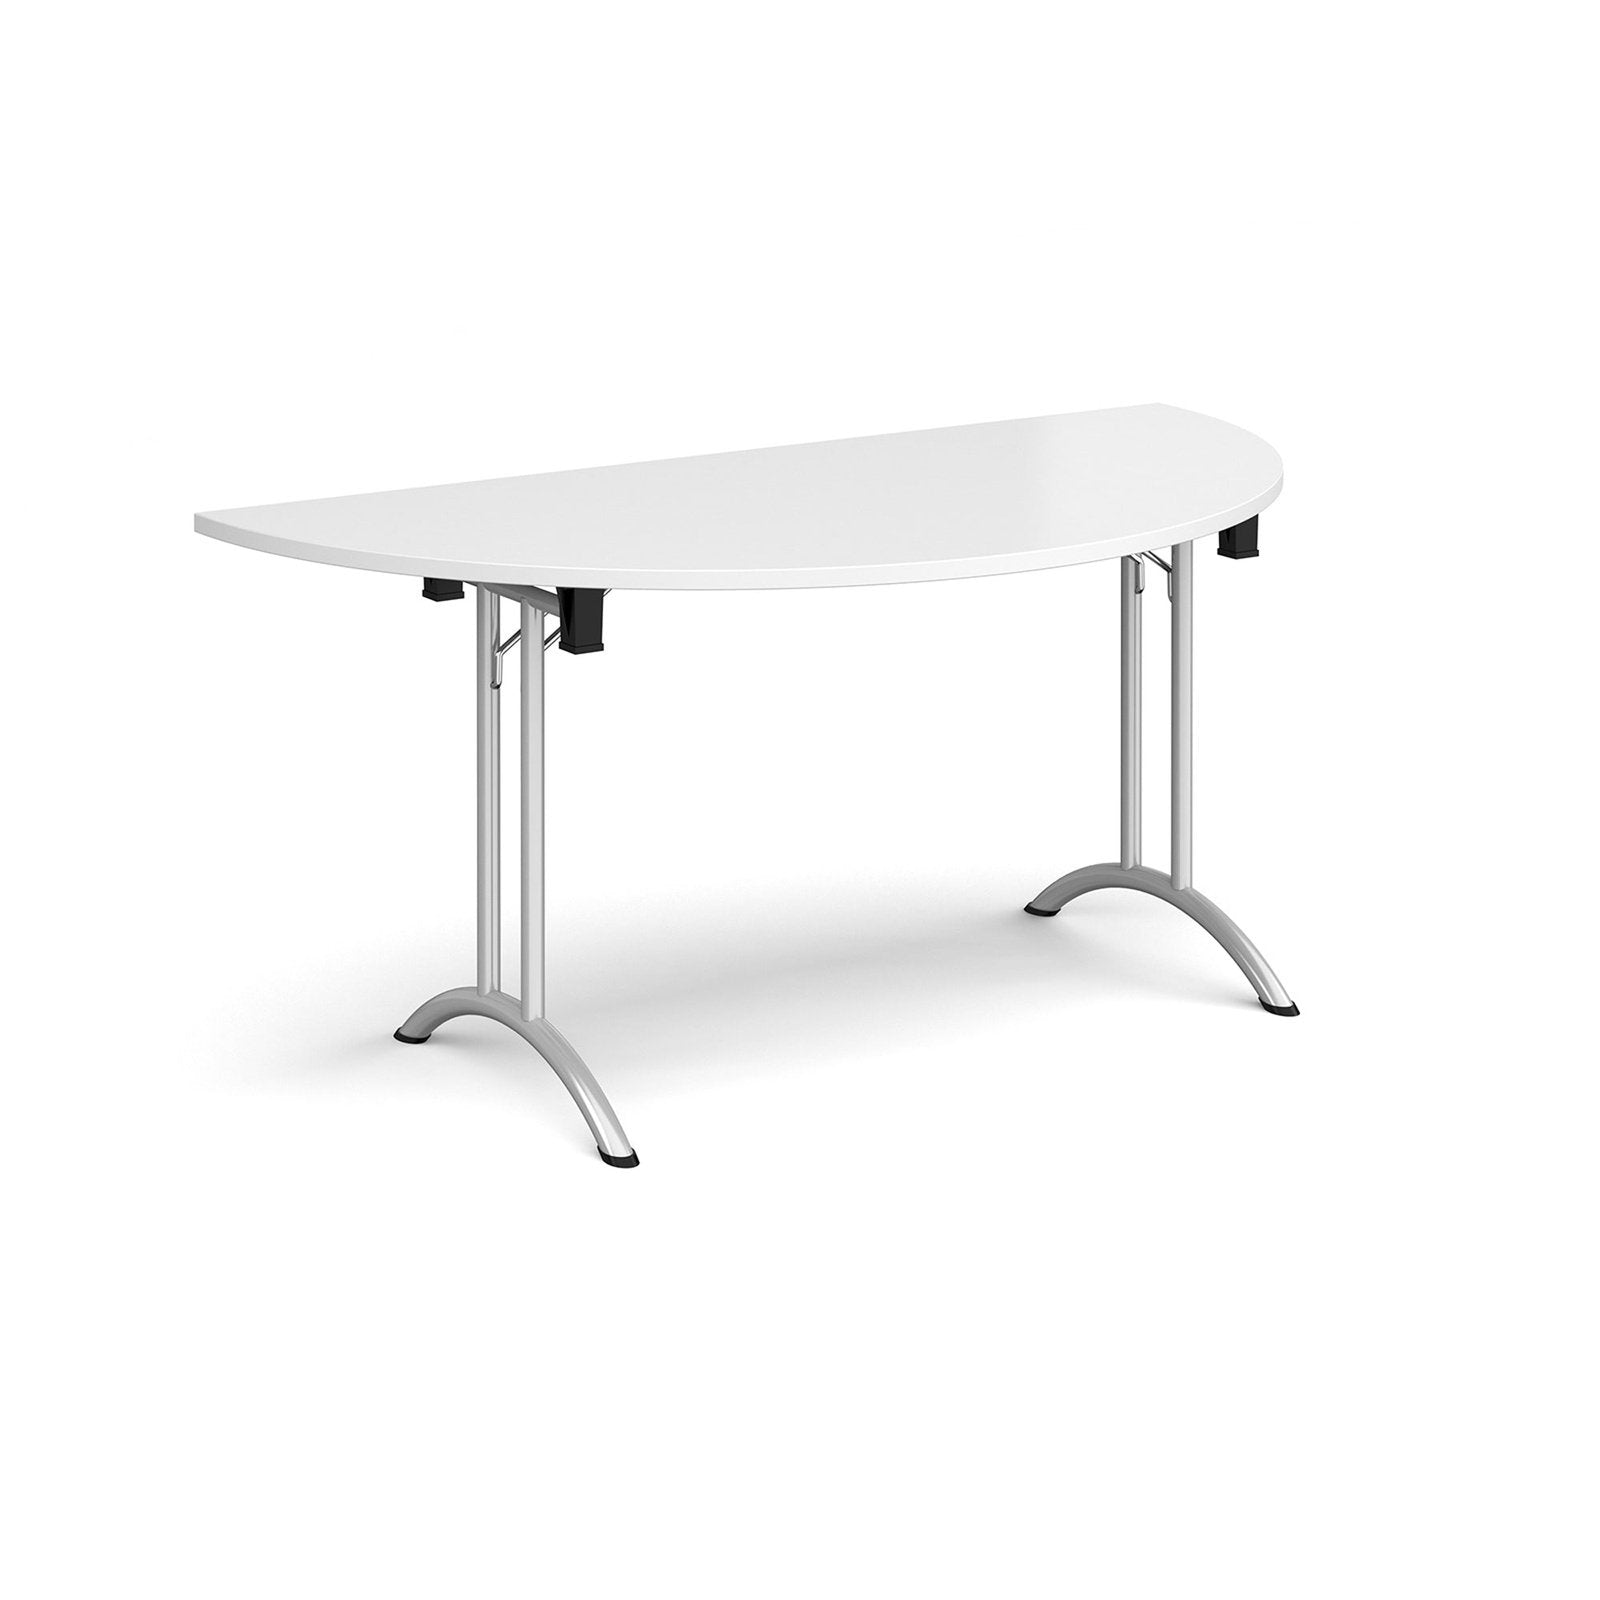 Semi circular folding leg table with curved foot rails - Office Products Online